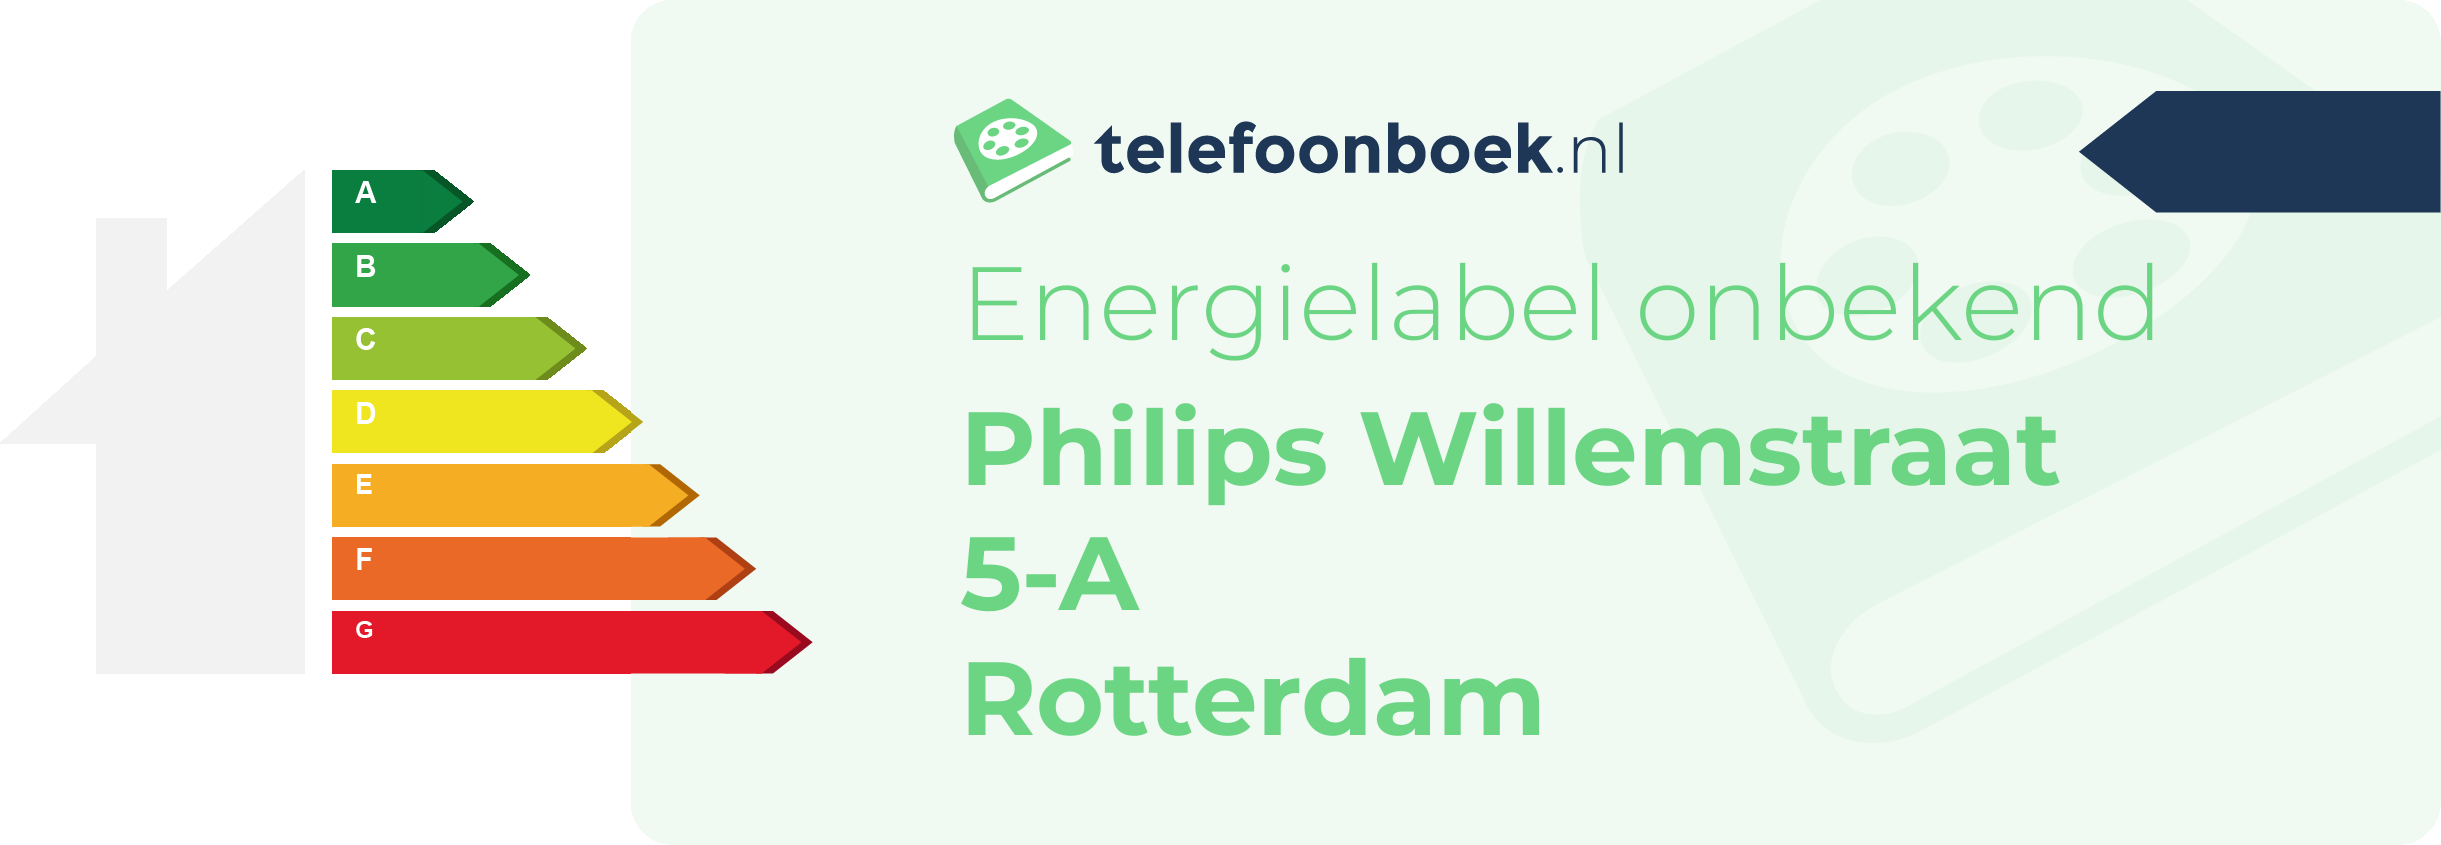 Energielabel Philips Willemstraat 5-A Rotterdam